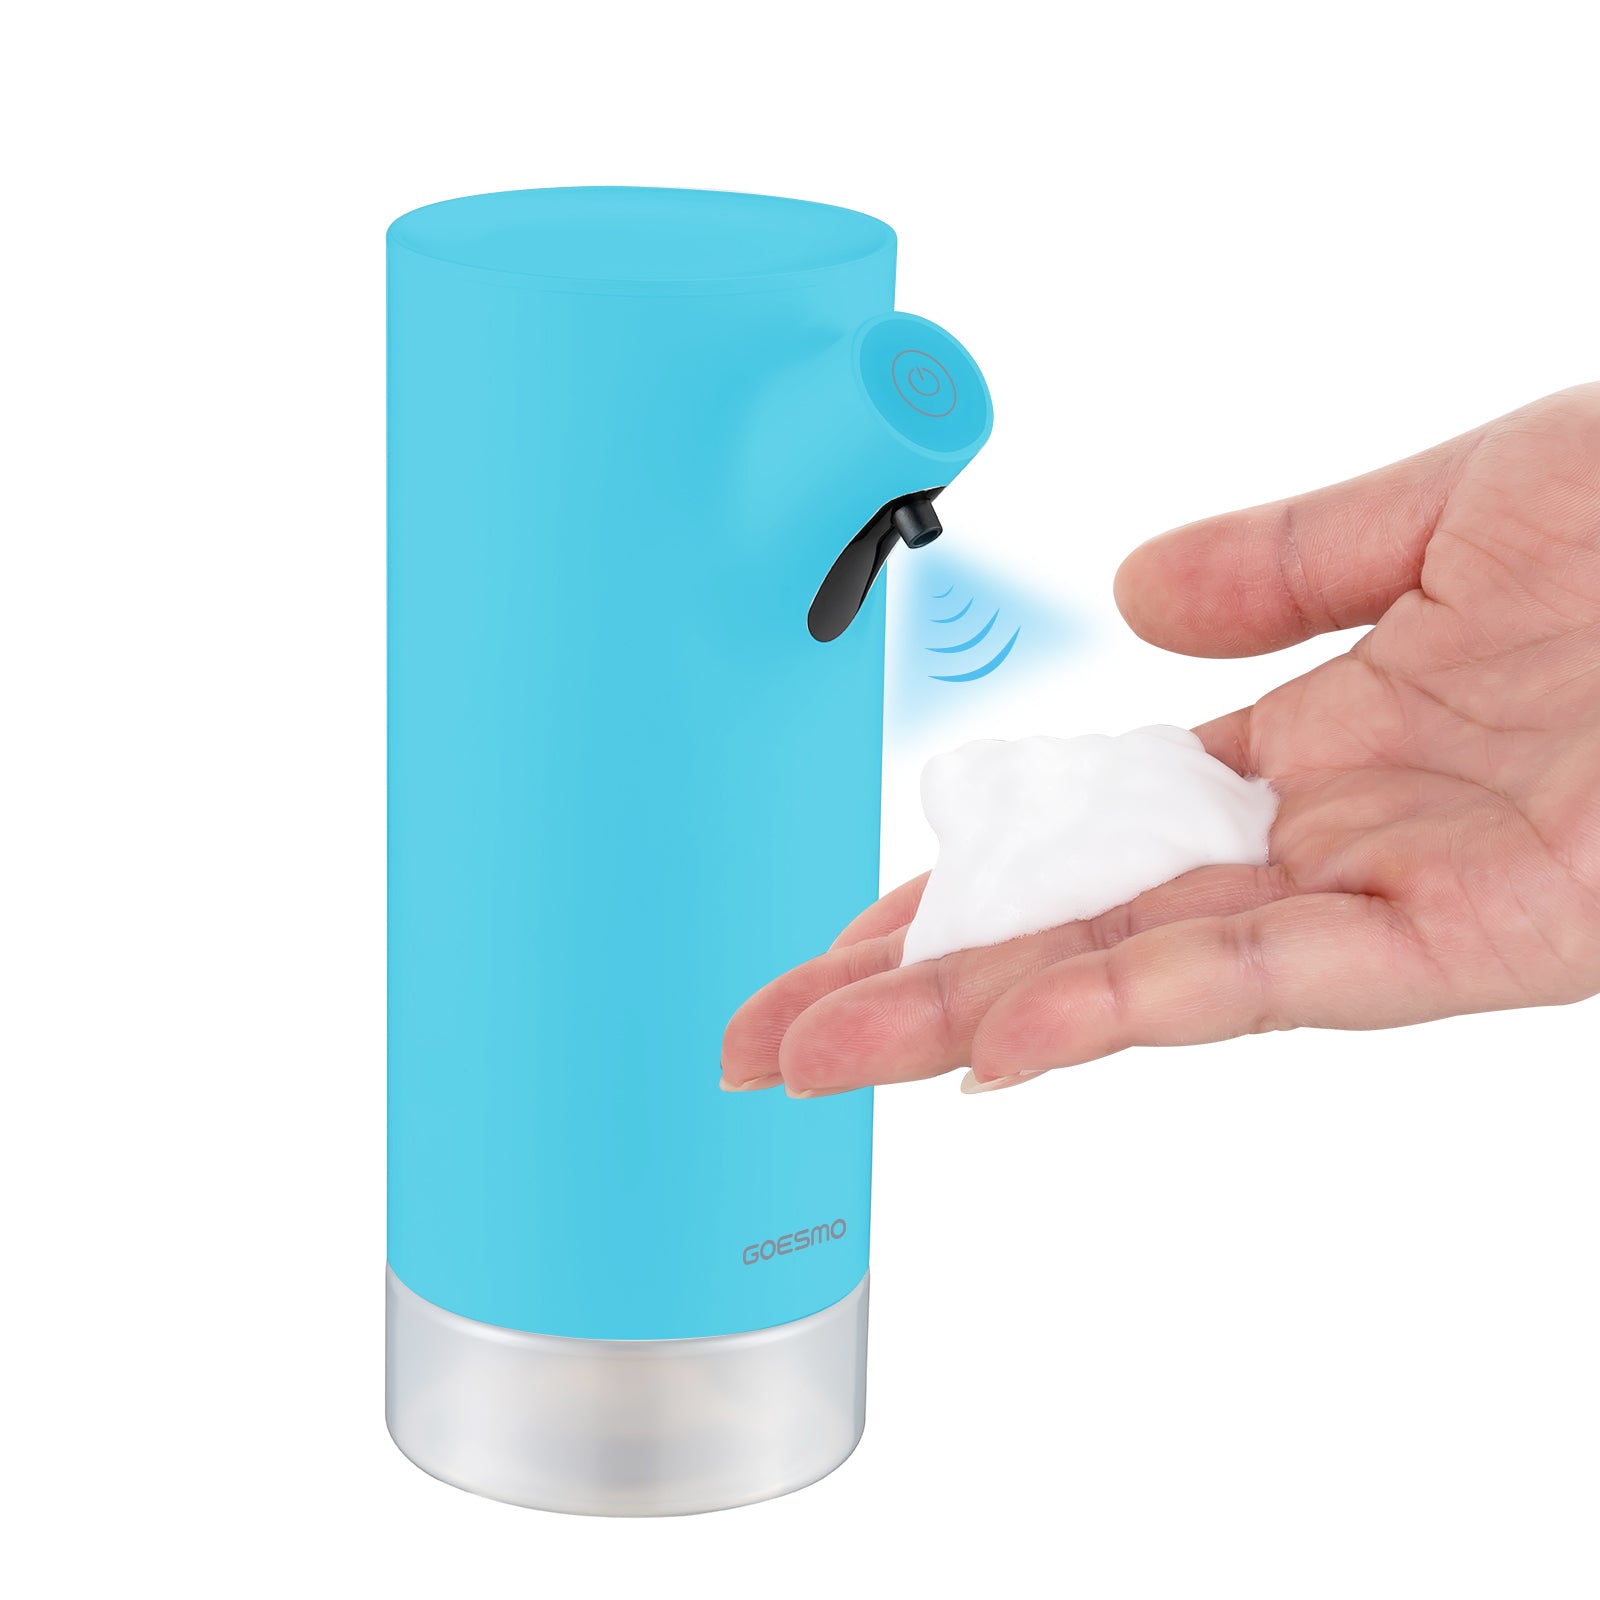 GOESMO 21270 Touchless Foaming Soap Dispenser for Bathroom Kitchen Soap